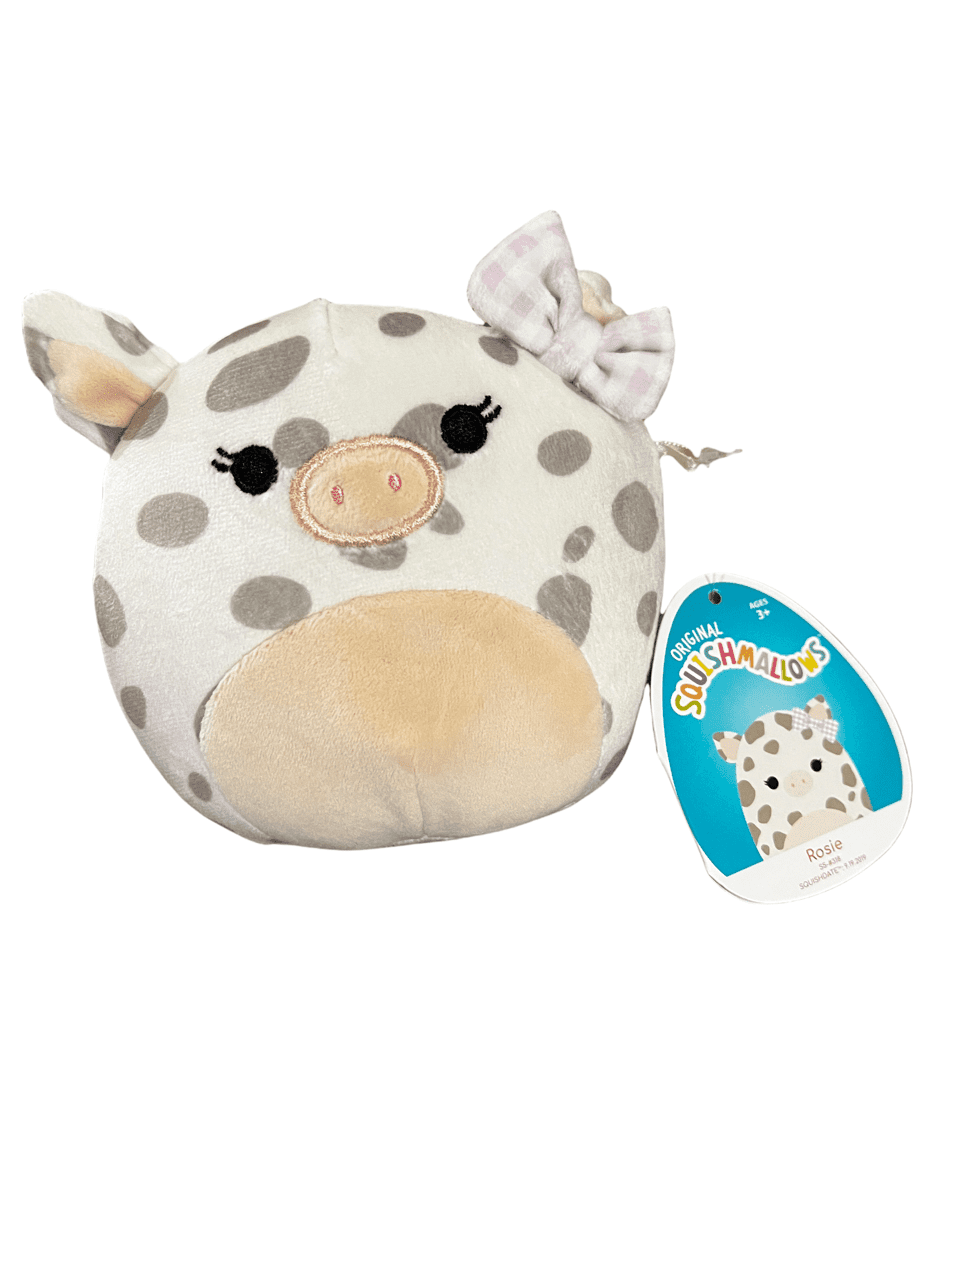 New With tags Squishmallows Easter Series Rosie the spotted cow with bandana 5” 